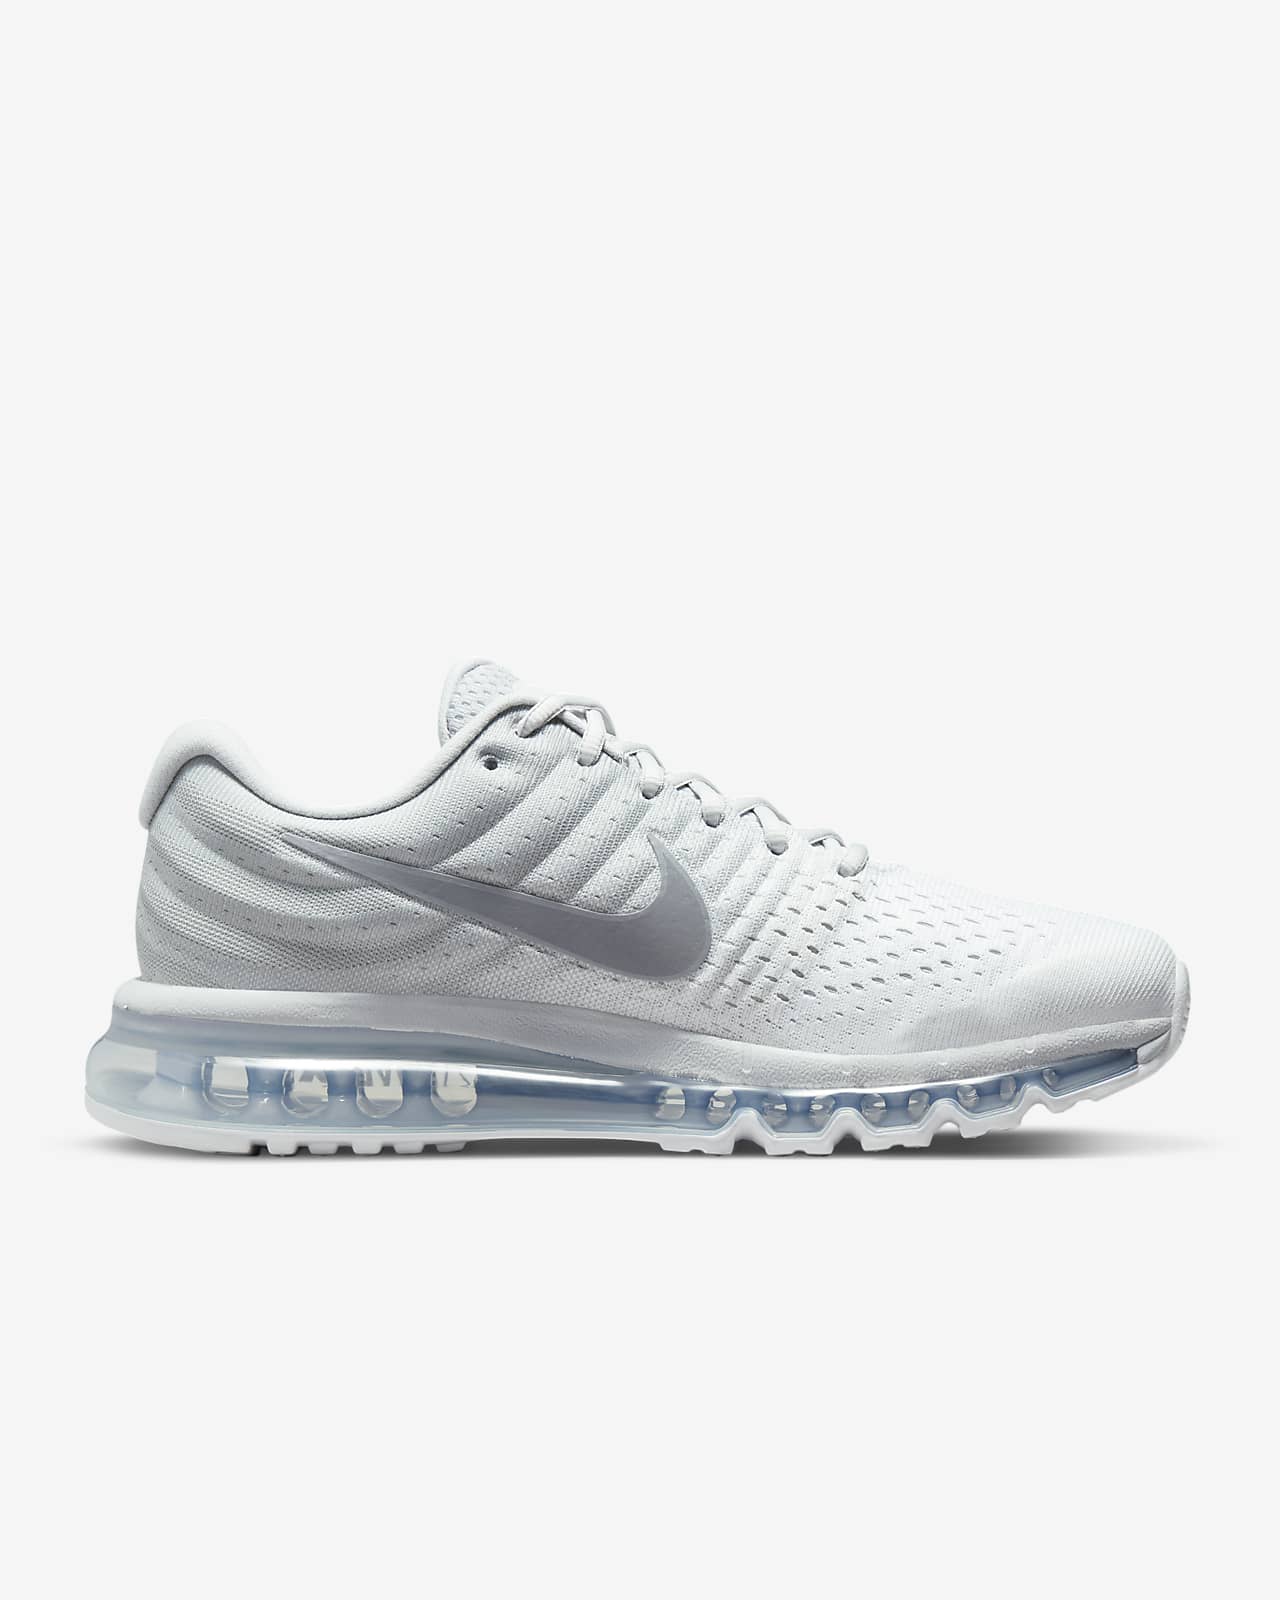 furniture tell me Foster parents Nike Air Max 2017 Men's Shoes. Nike.com